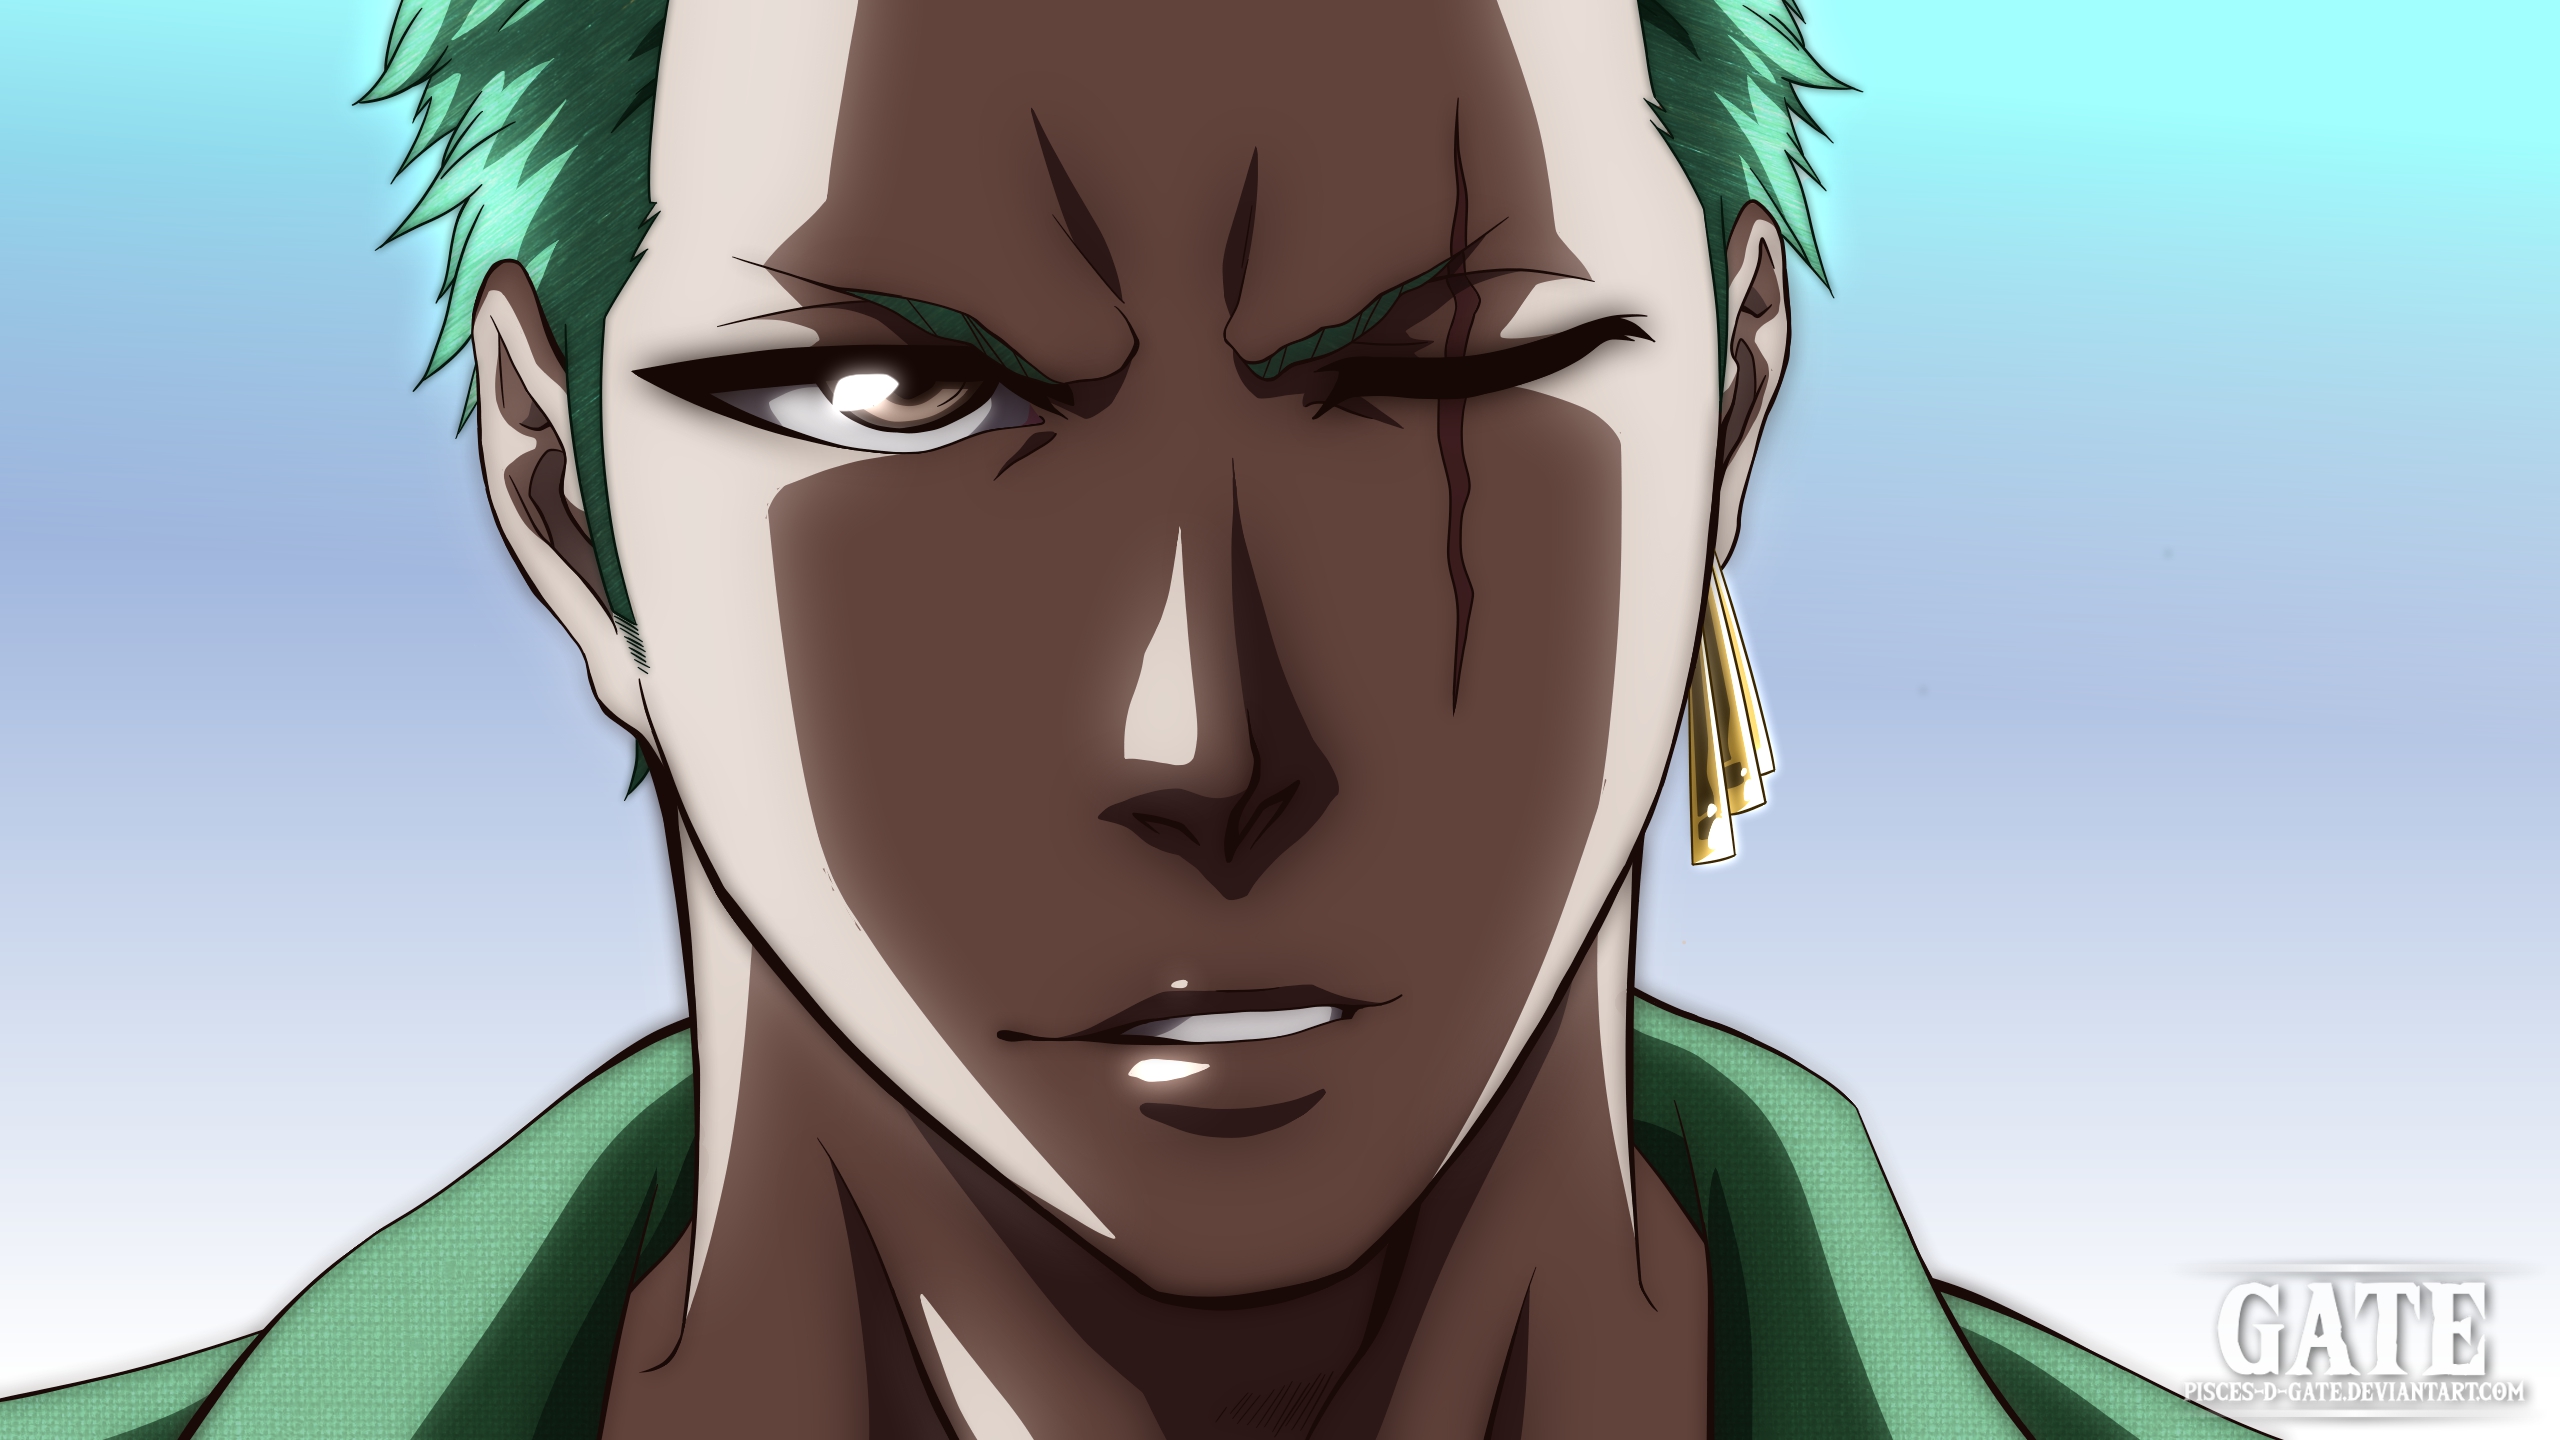 One Piece Roronoa Zoro 19 By Pisces D Gate On Deviantart